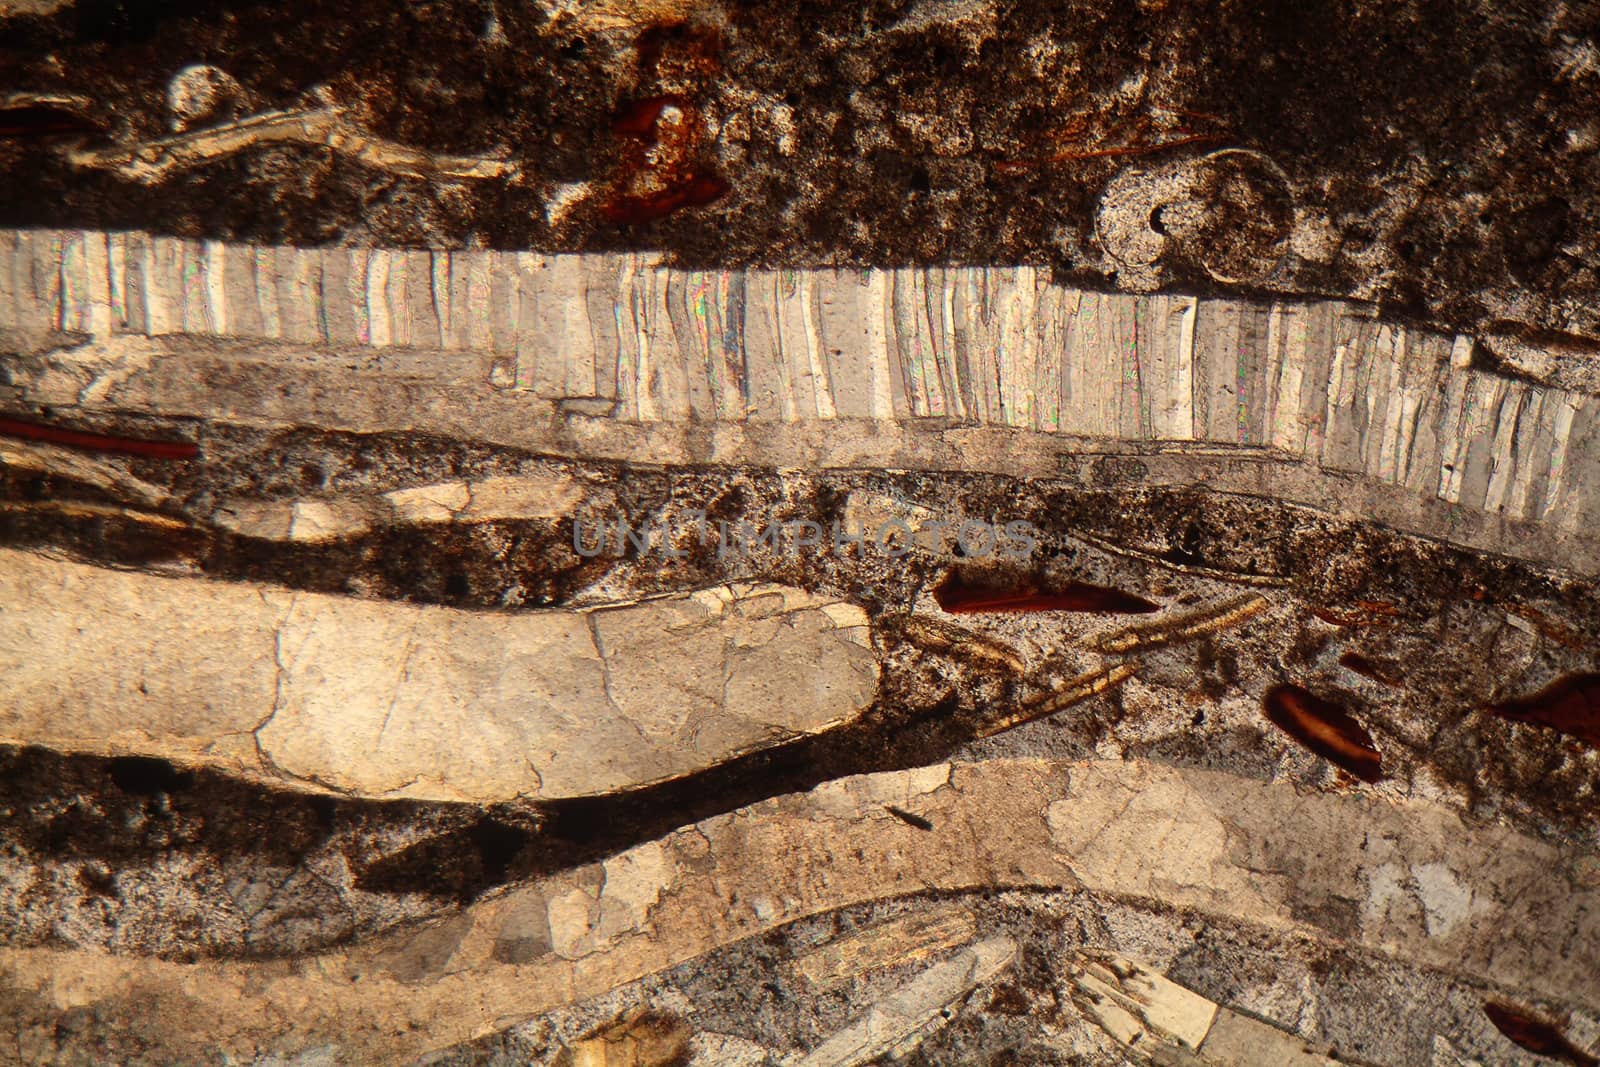 Thin section of fossil calcareous shell fragments from the Lower Jurassic (magnification 80x and polarized light).